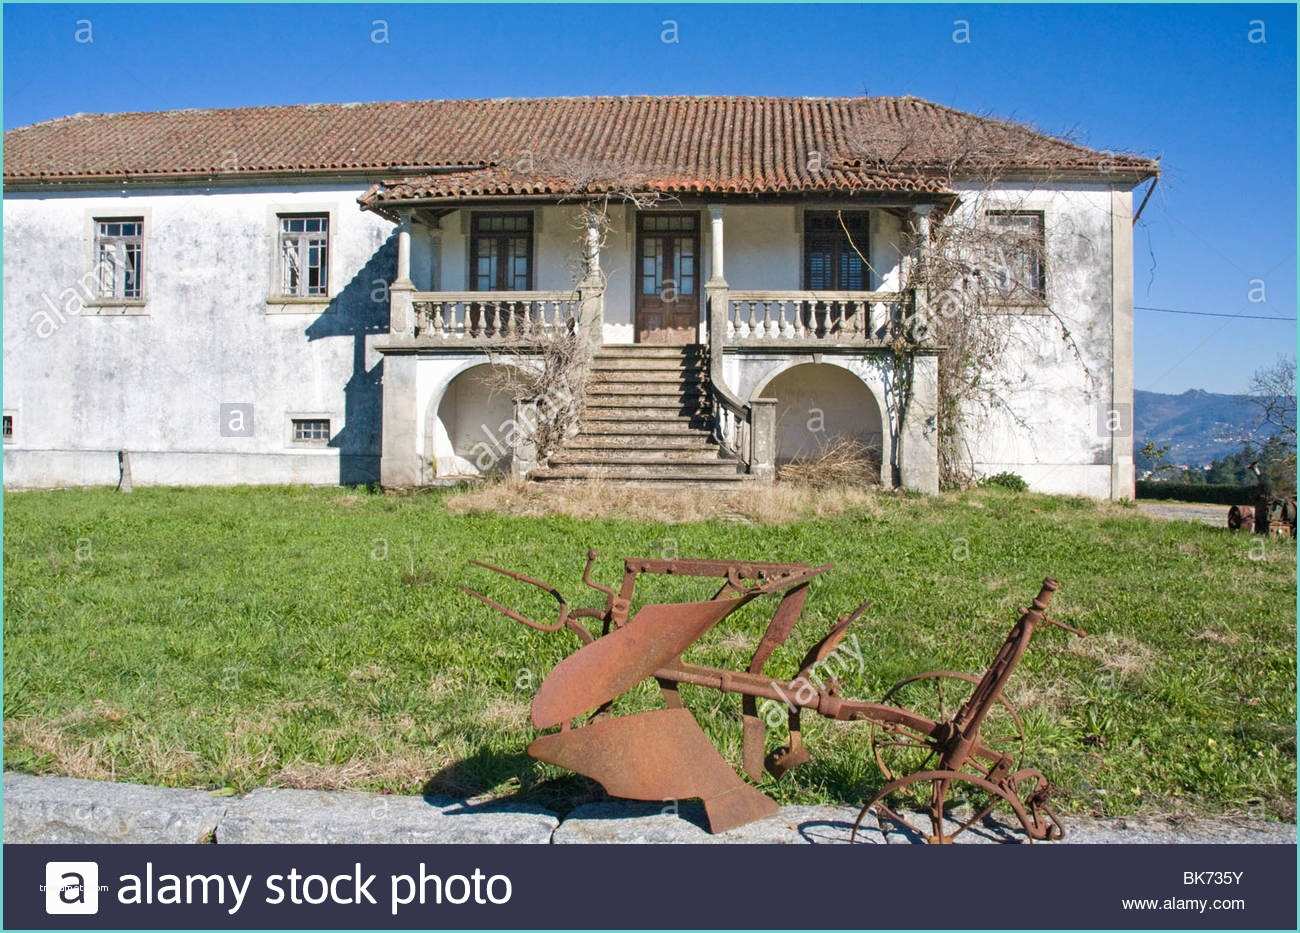 Maison Stock Images Portugal Dilapidated S & Portugal Dilapidated